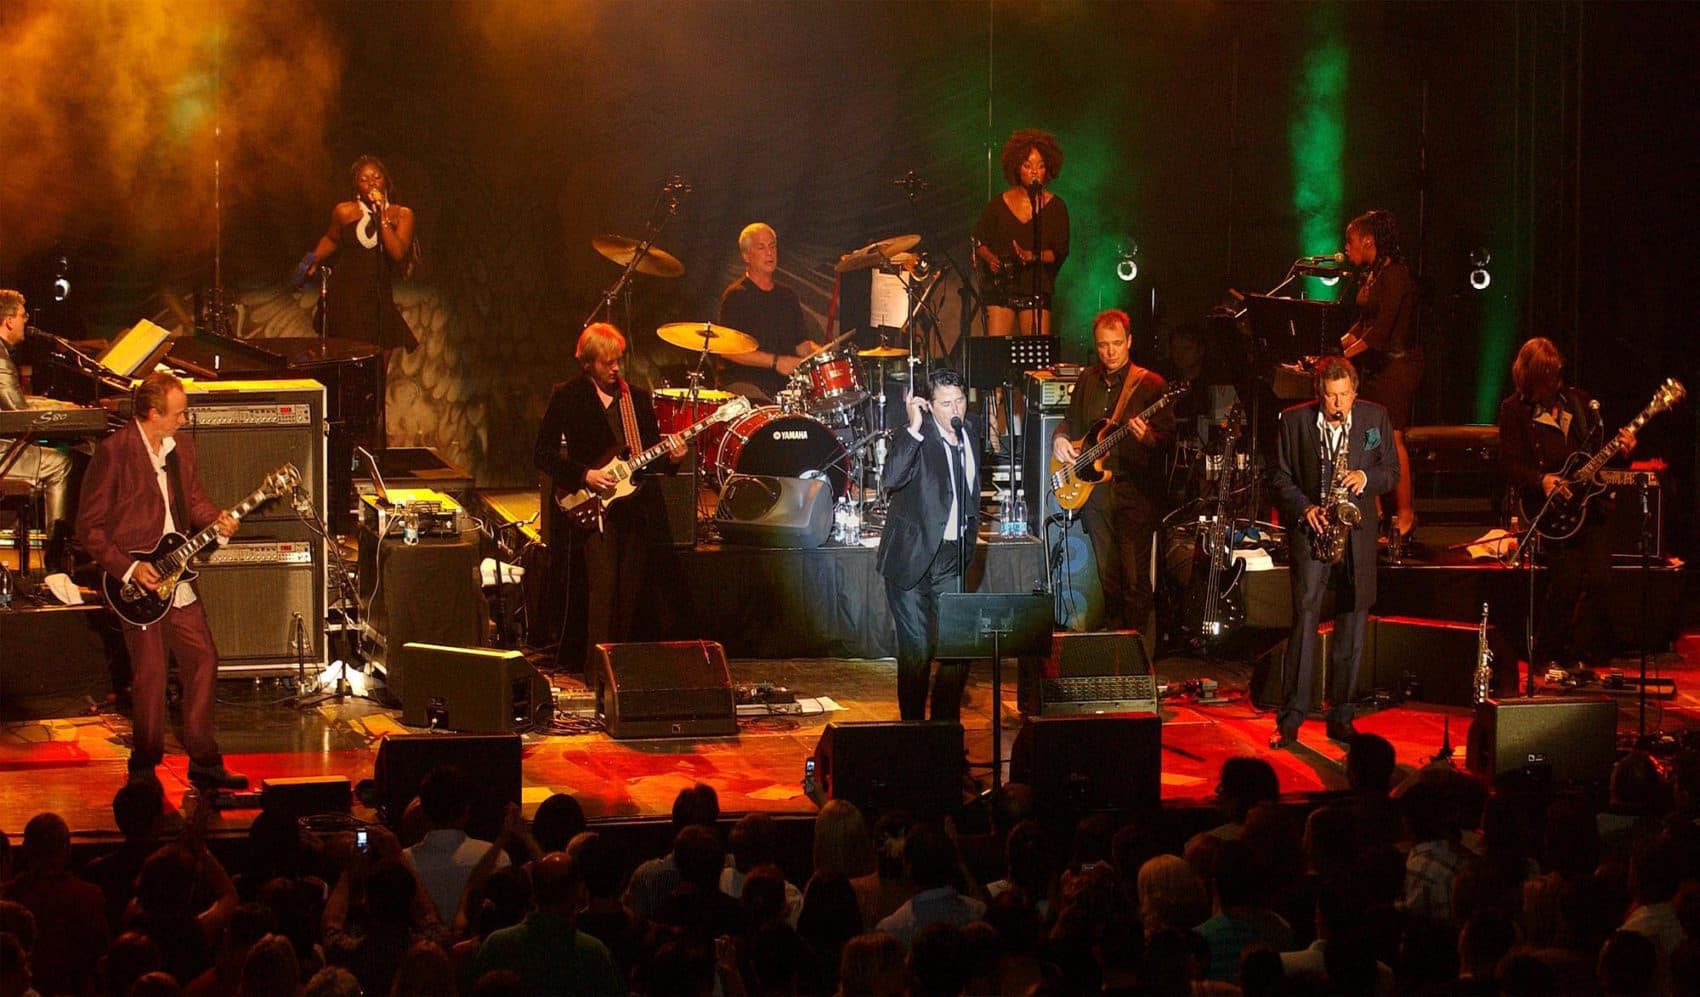 Brian Ferry, center, performs during a concert of the British pop band Roxy Music in Macedonia's southwestern town of Ohrid on July 14, 2006. (Boris Grdanoski/AP)